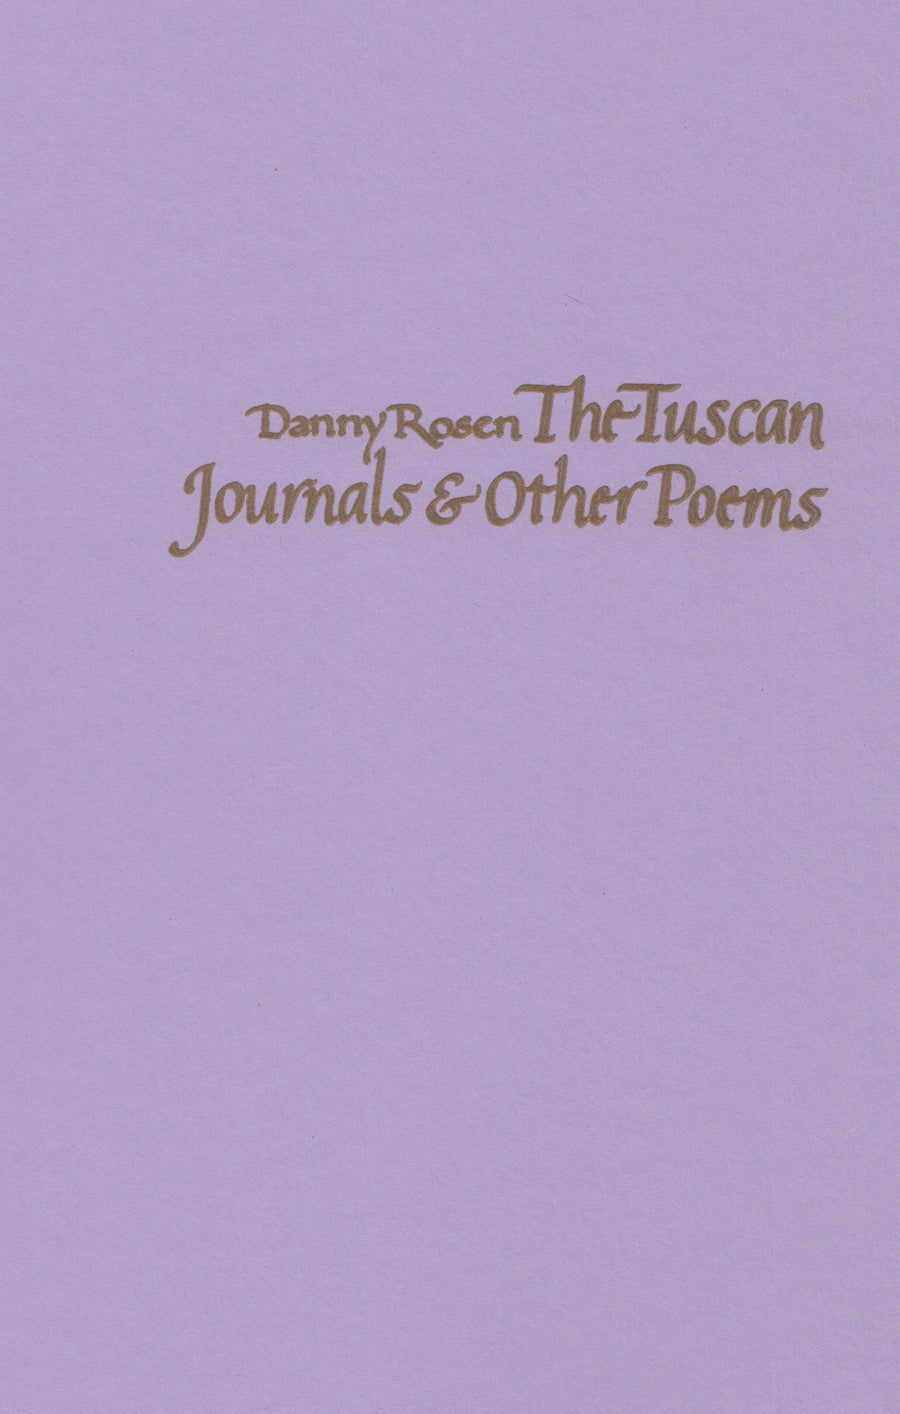 DANNY ROSEN : THE TUSCAN JOURNALS & OTHER POEMS